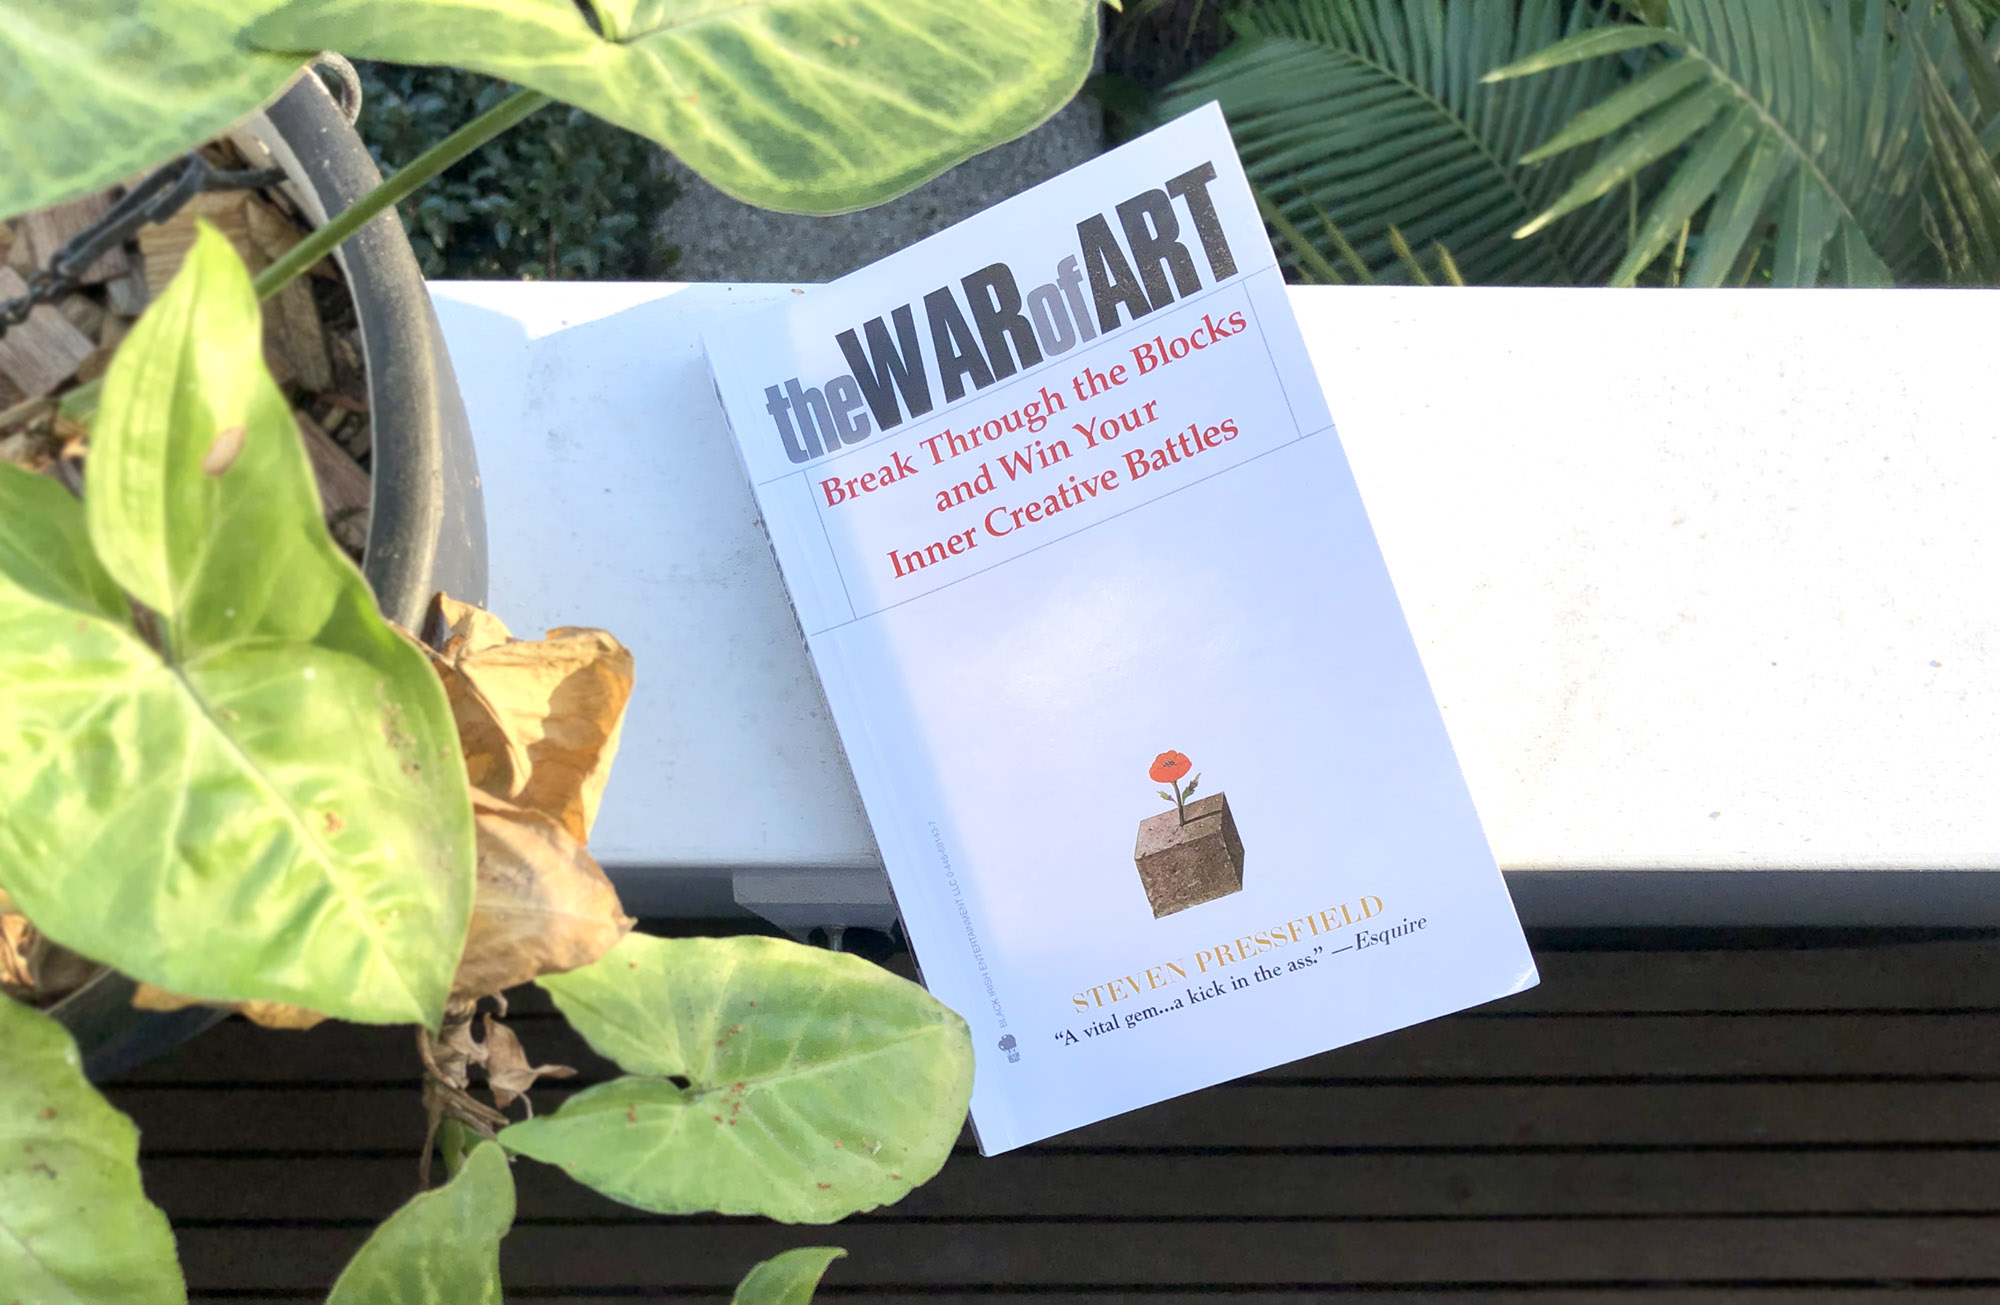 Review: “The War of Art” by Steven Pressfield